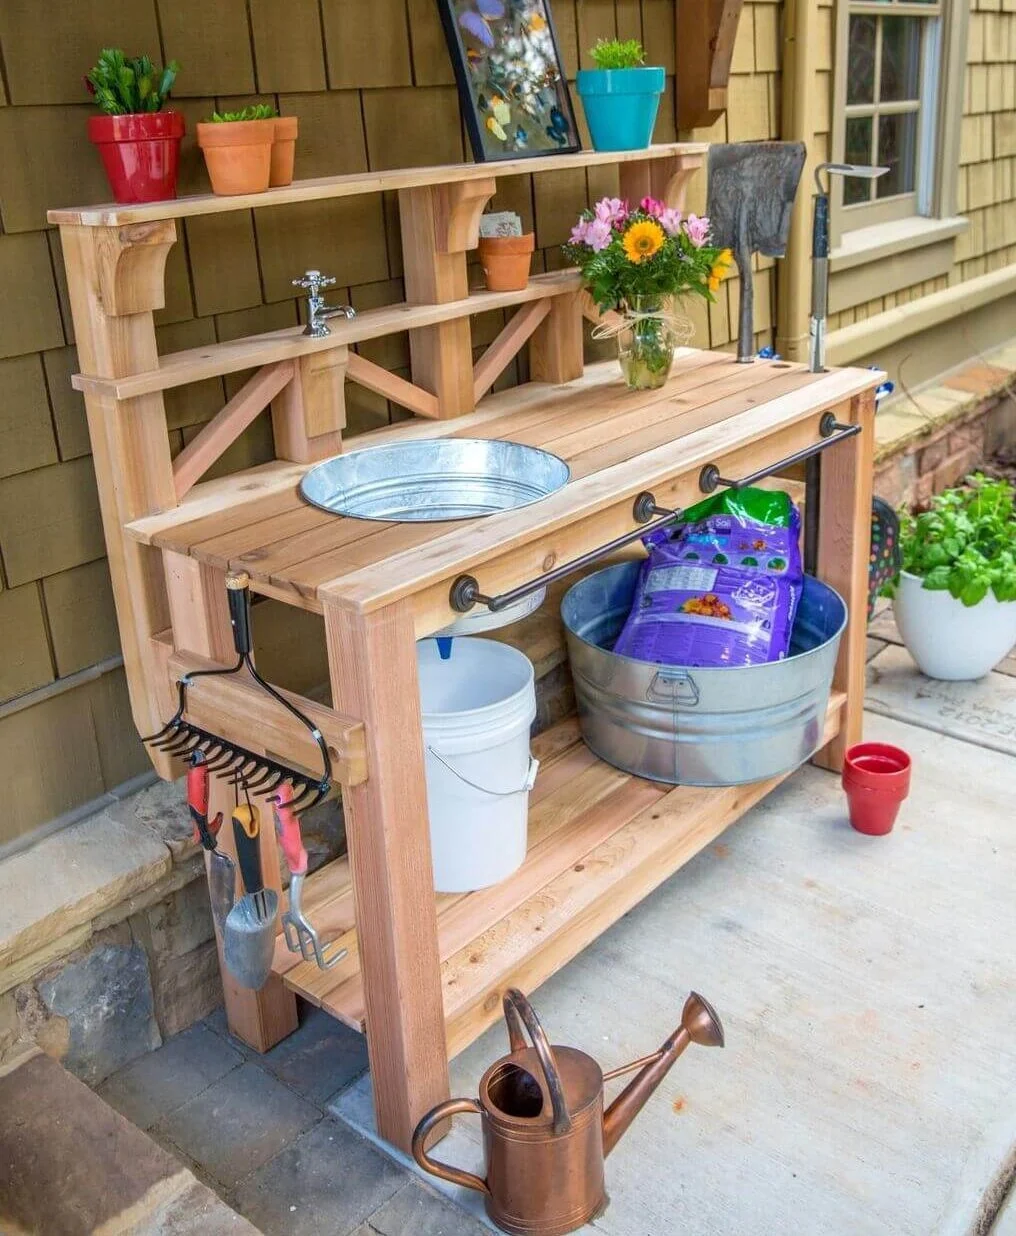 A Garden Potting Bench with Sink Project idea